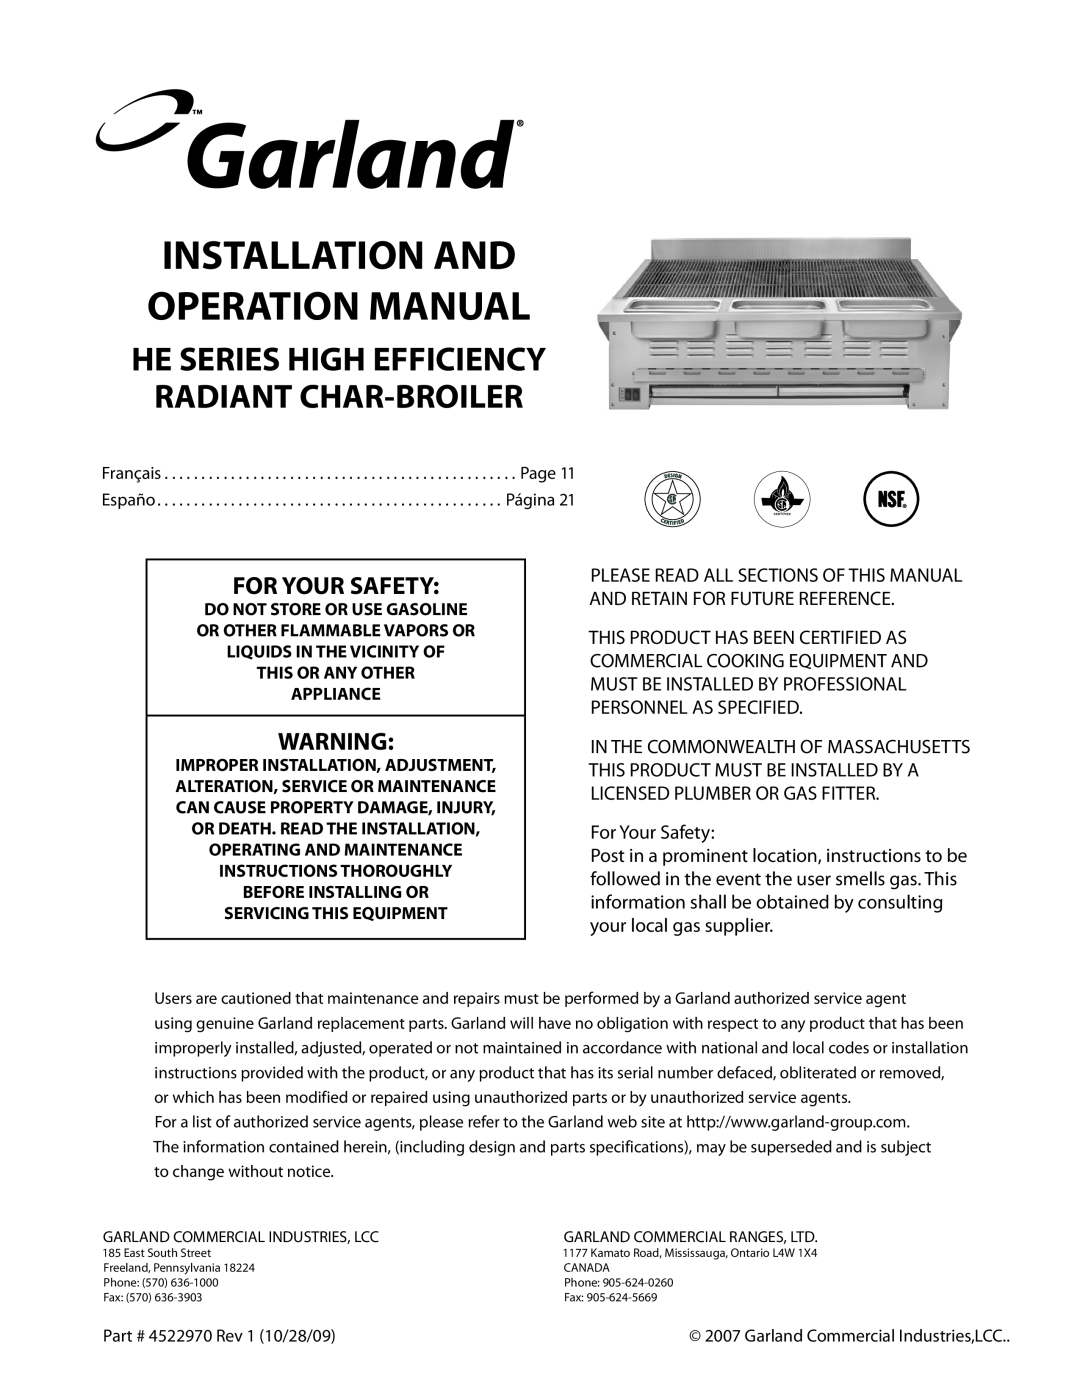 Garland 4522970 REV 1 operation manual He Series High Efficiency Radiant Char-Broiler, For Your Safety 